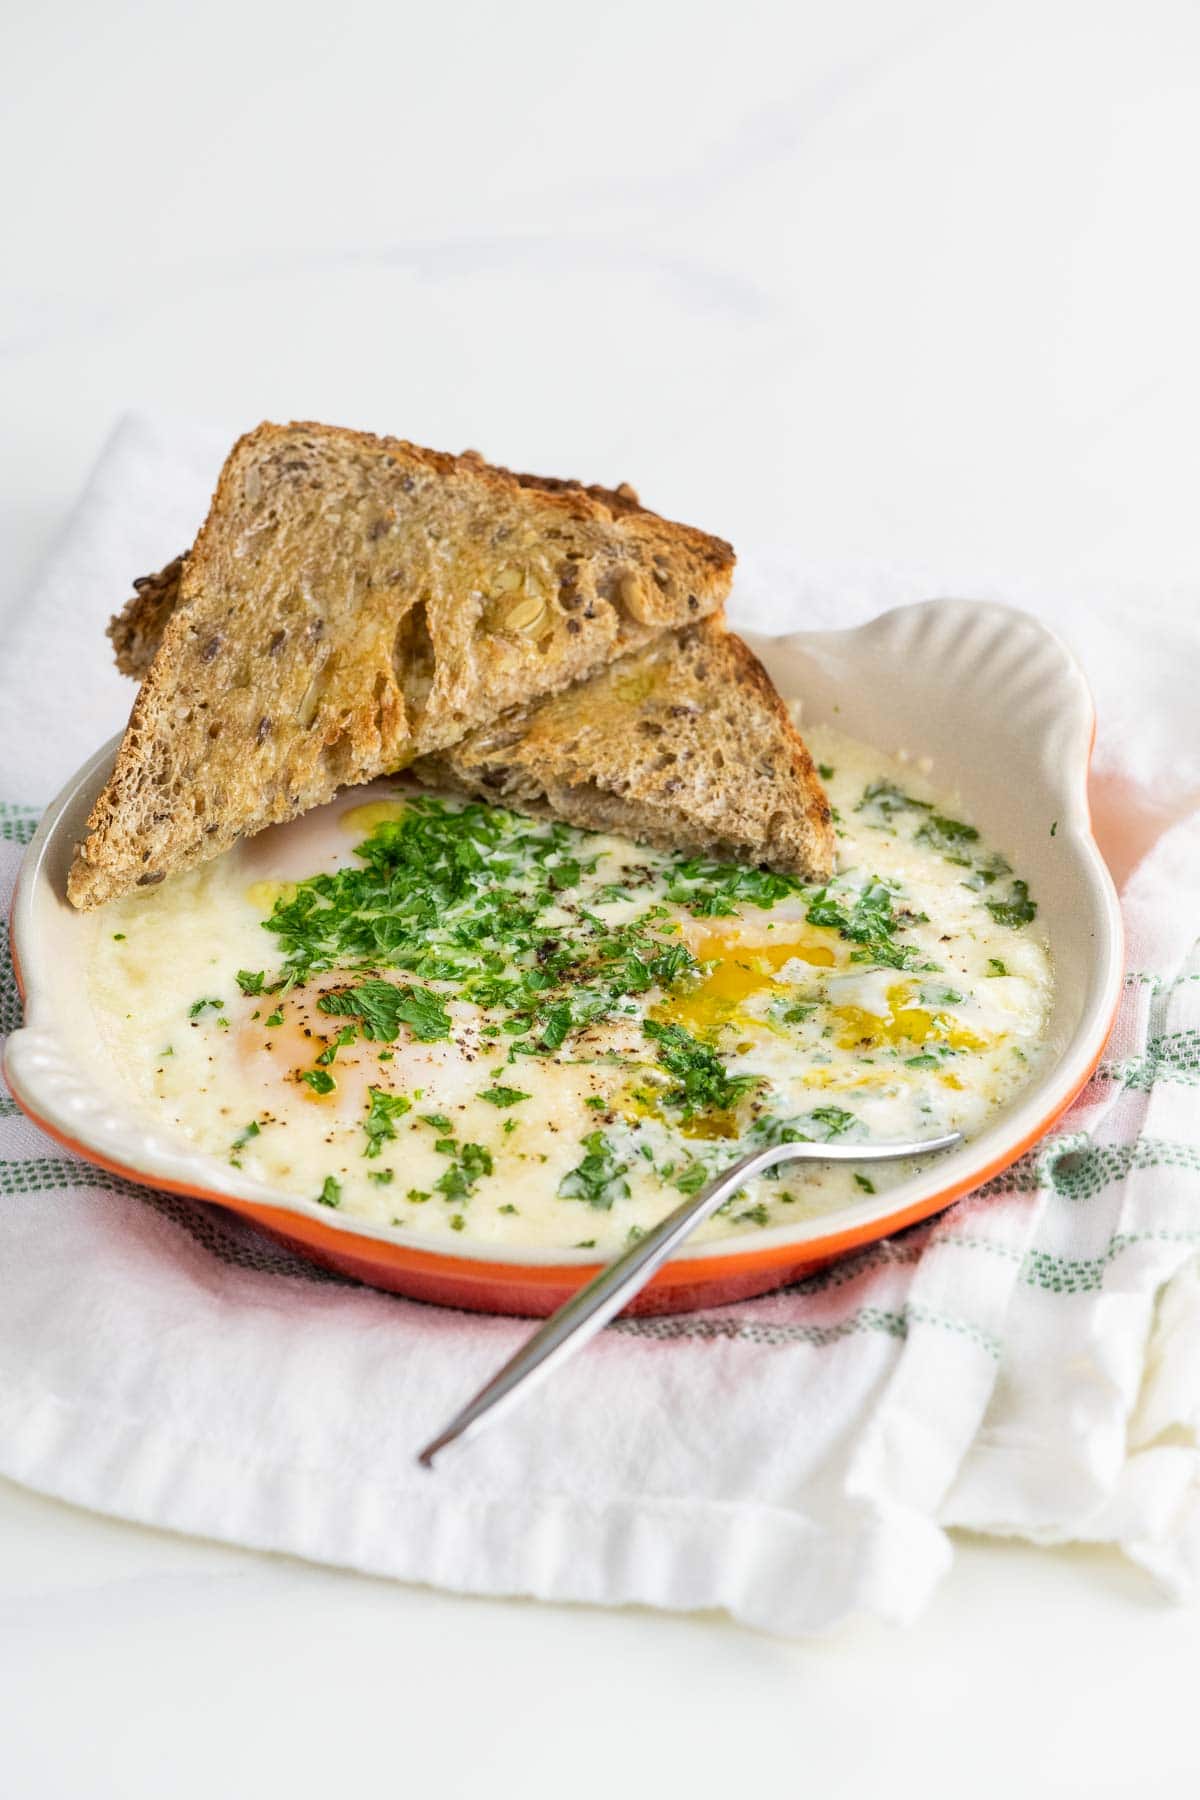 oeufs en cocotte (french baked eggs) with toast and a fork on a cloth napkin